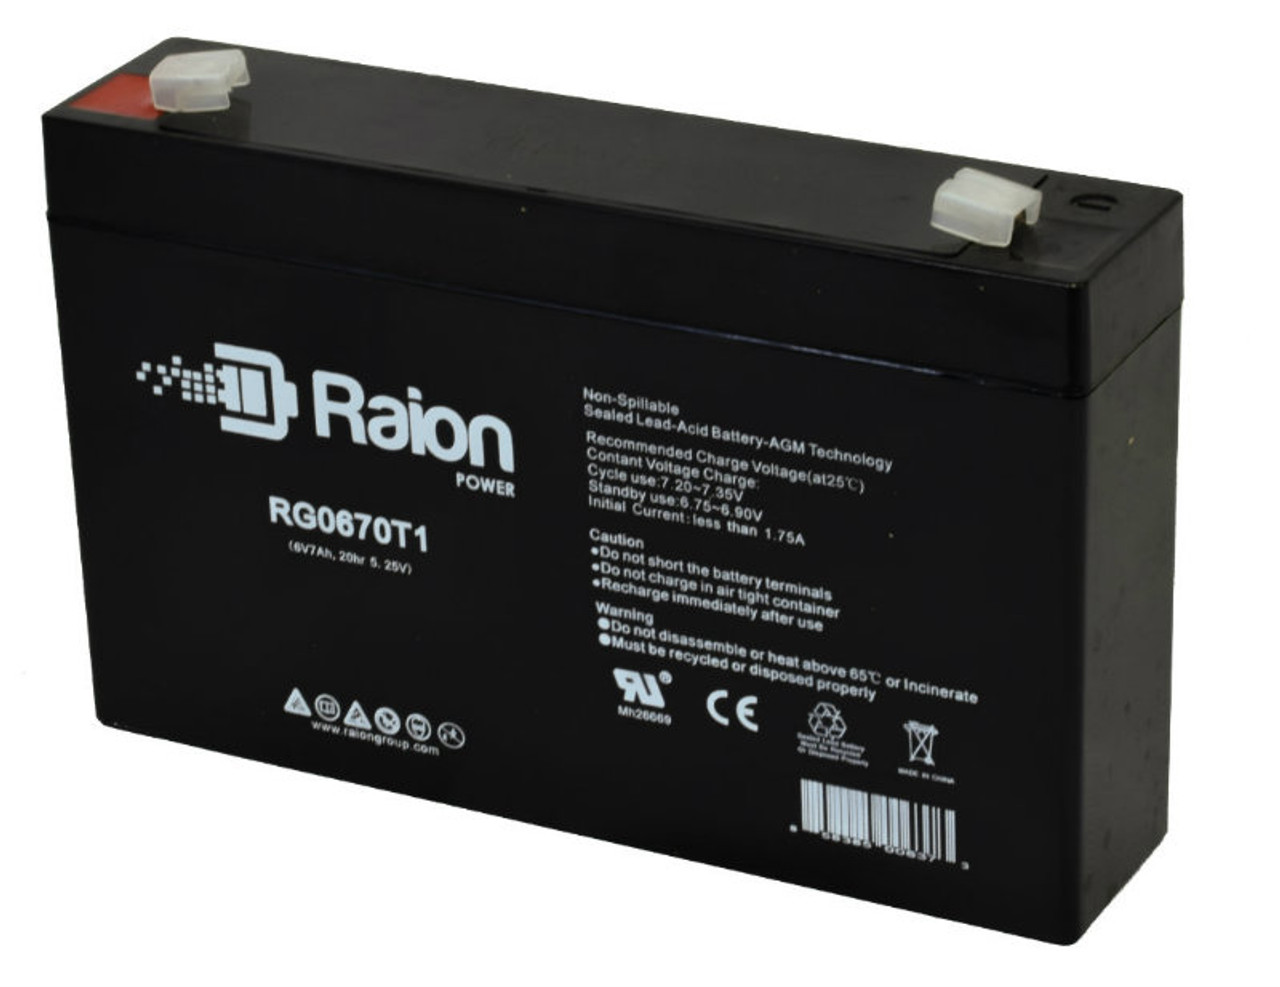 Raion Power RG0670T1 6V 7Ah Replacement Battery Cartridge for AJC C7S